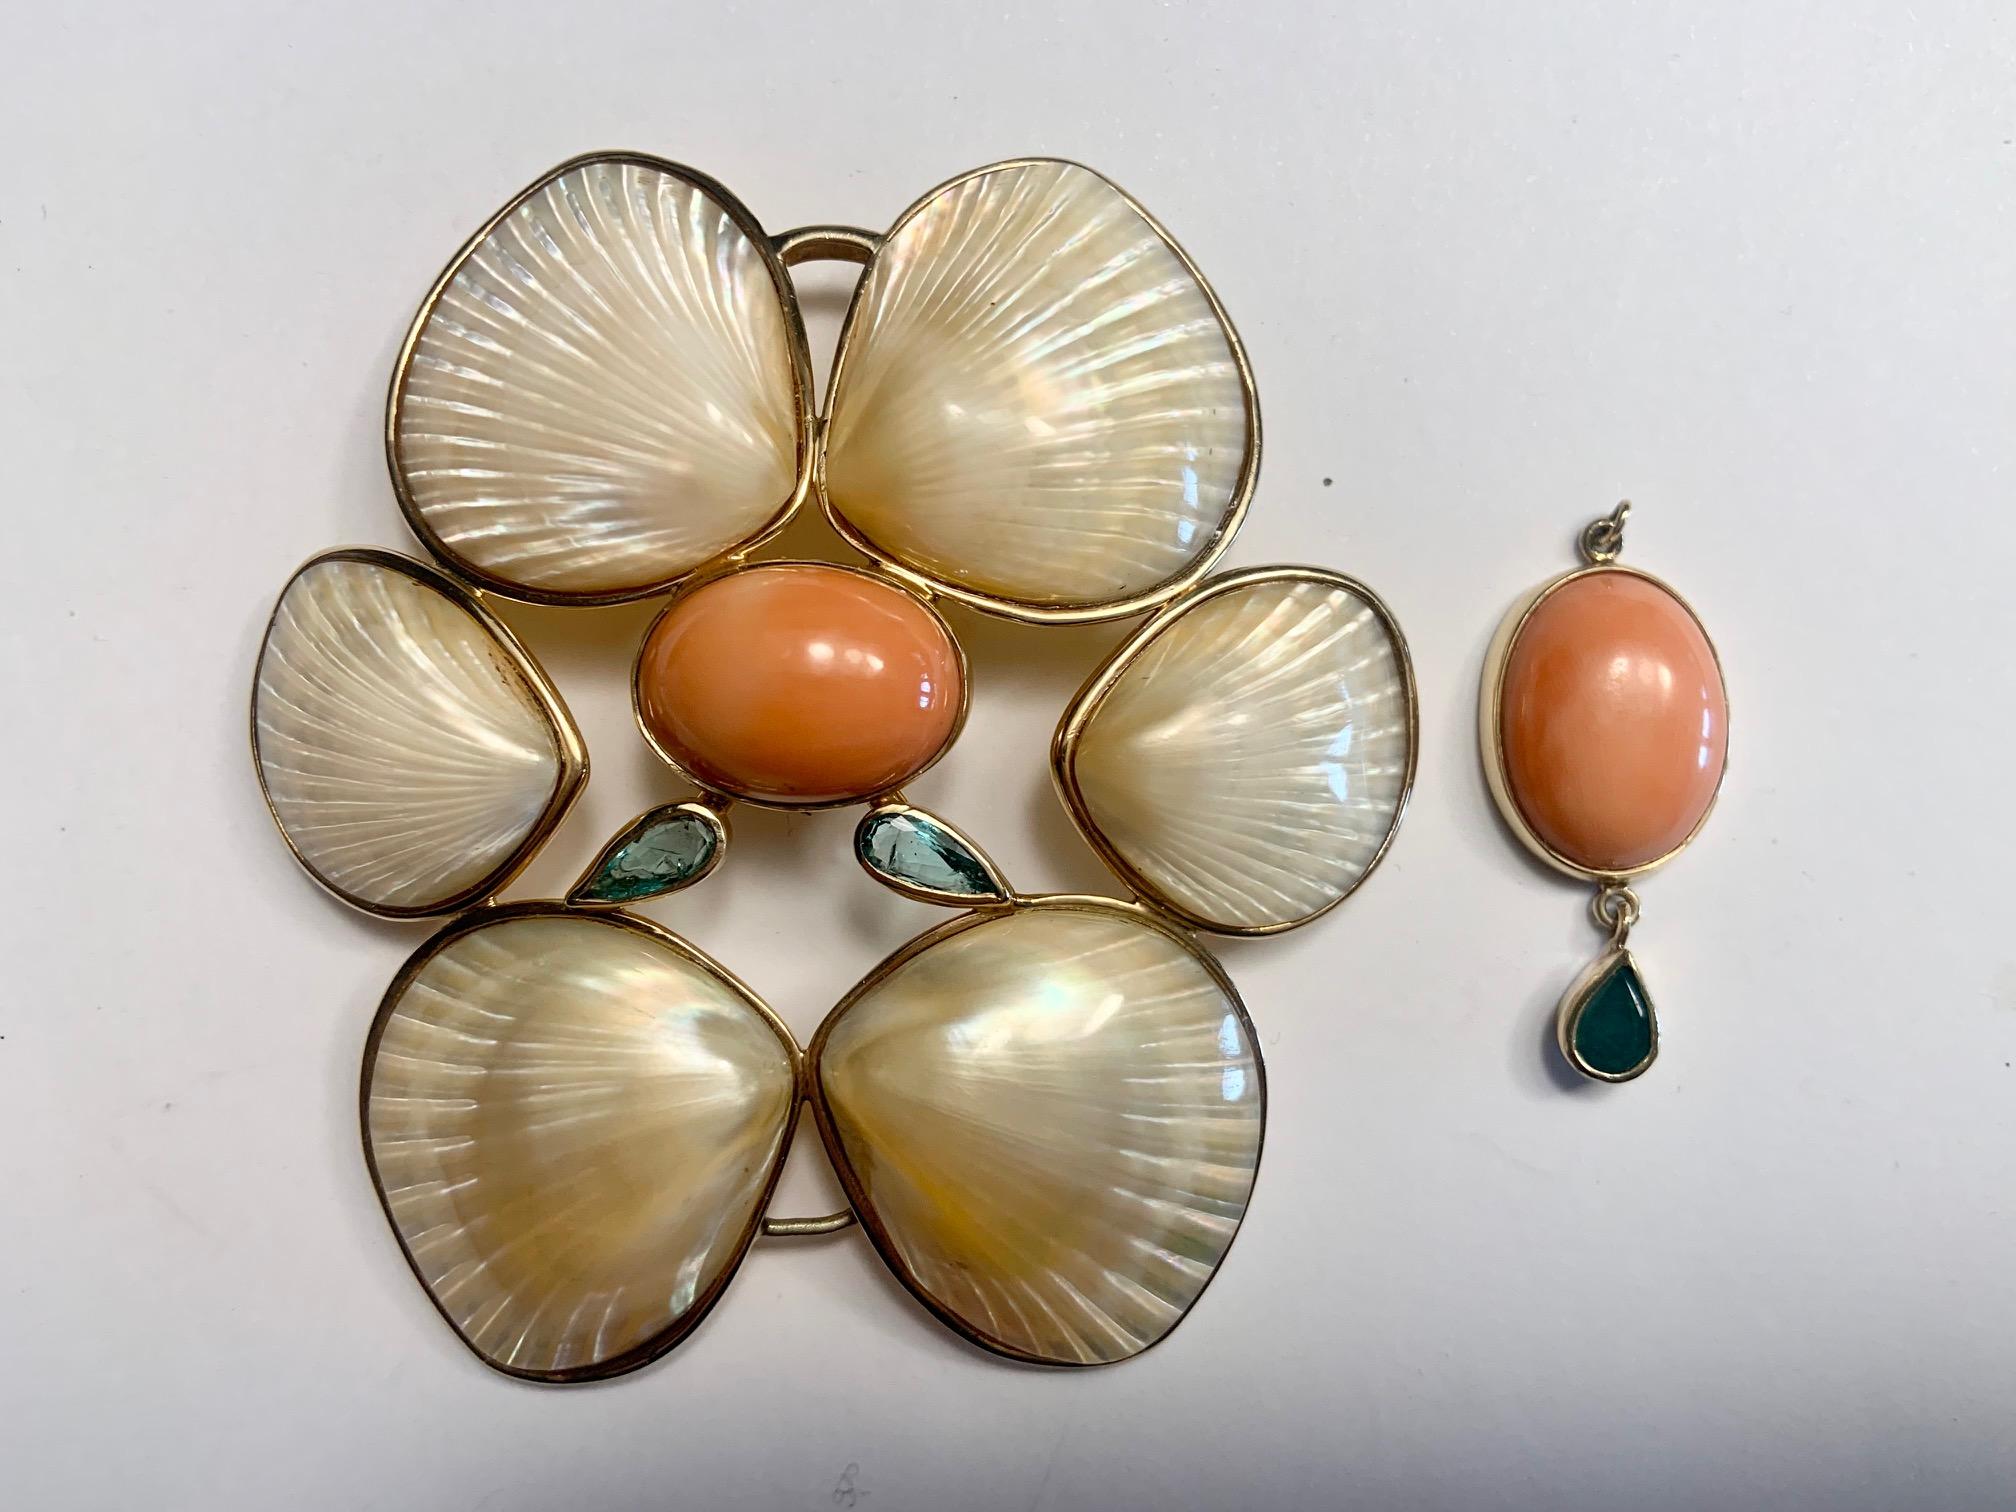 Elegant and versatile this four shell pin designed by Marguerite Stix has two faceted emeralds in the center and a large cabochon coral and emerald drop  below. The brooch can be worn as a pin or a pendant, a pin without the coral drop, and the